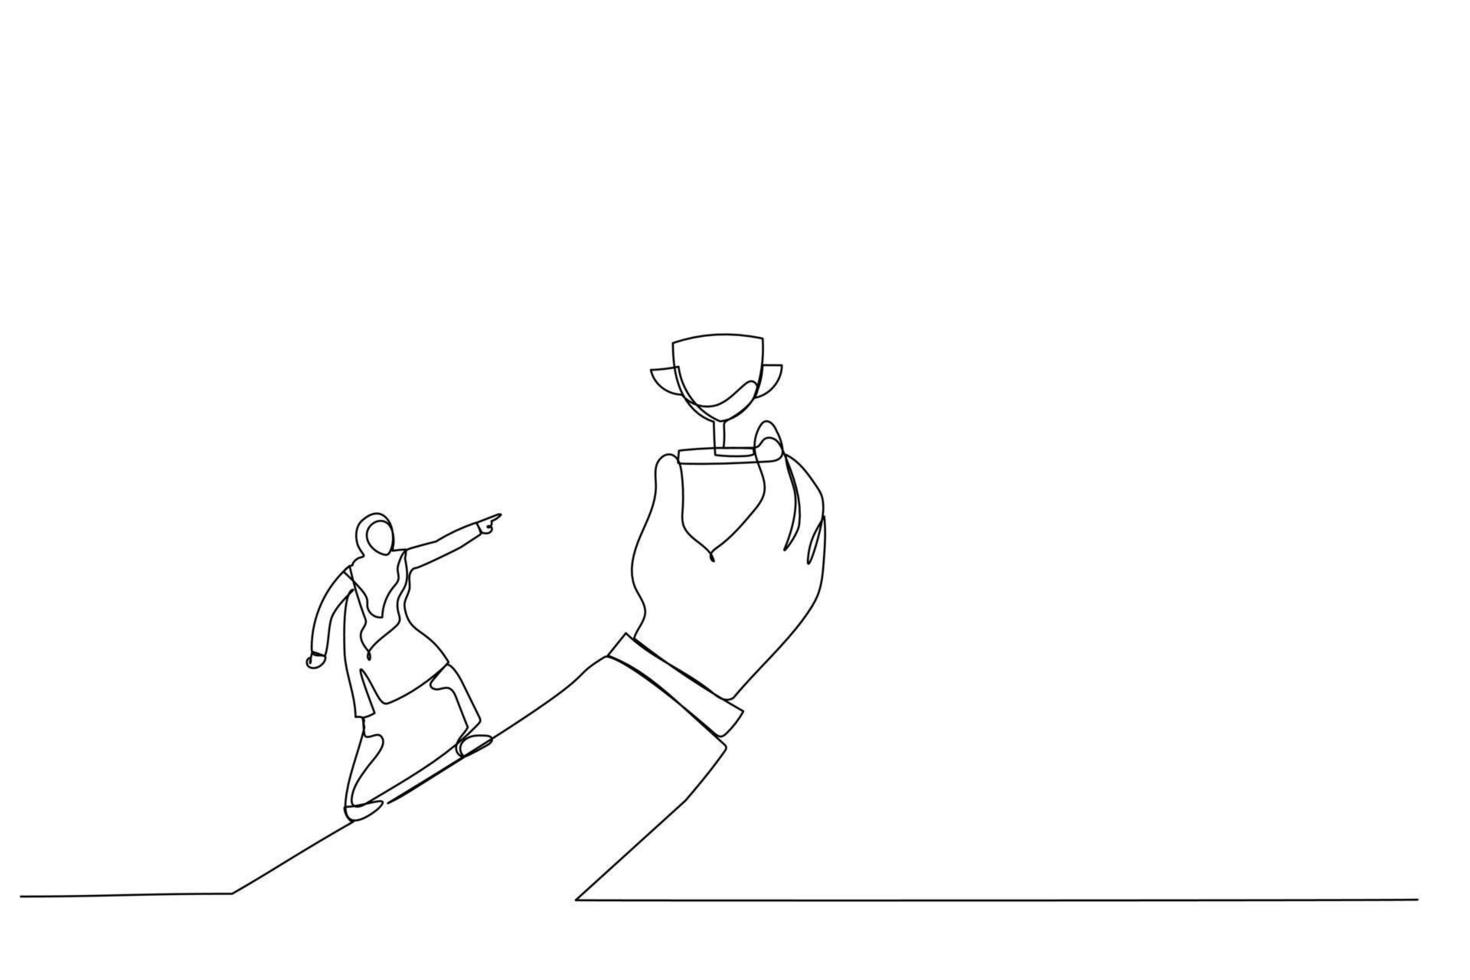 Drawing of aran woman run with full effort to reach trophy cup in giant hand. Metaphor for motivation to achieve goal, small win to motivate employee. Continuous line art style vector